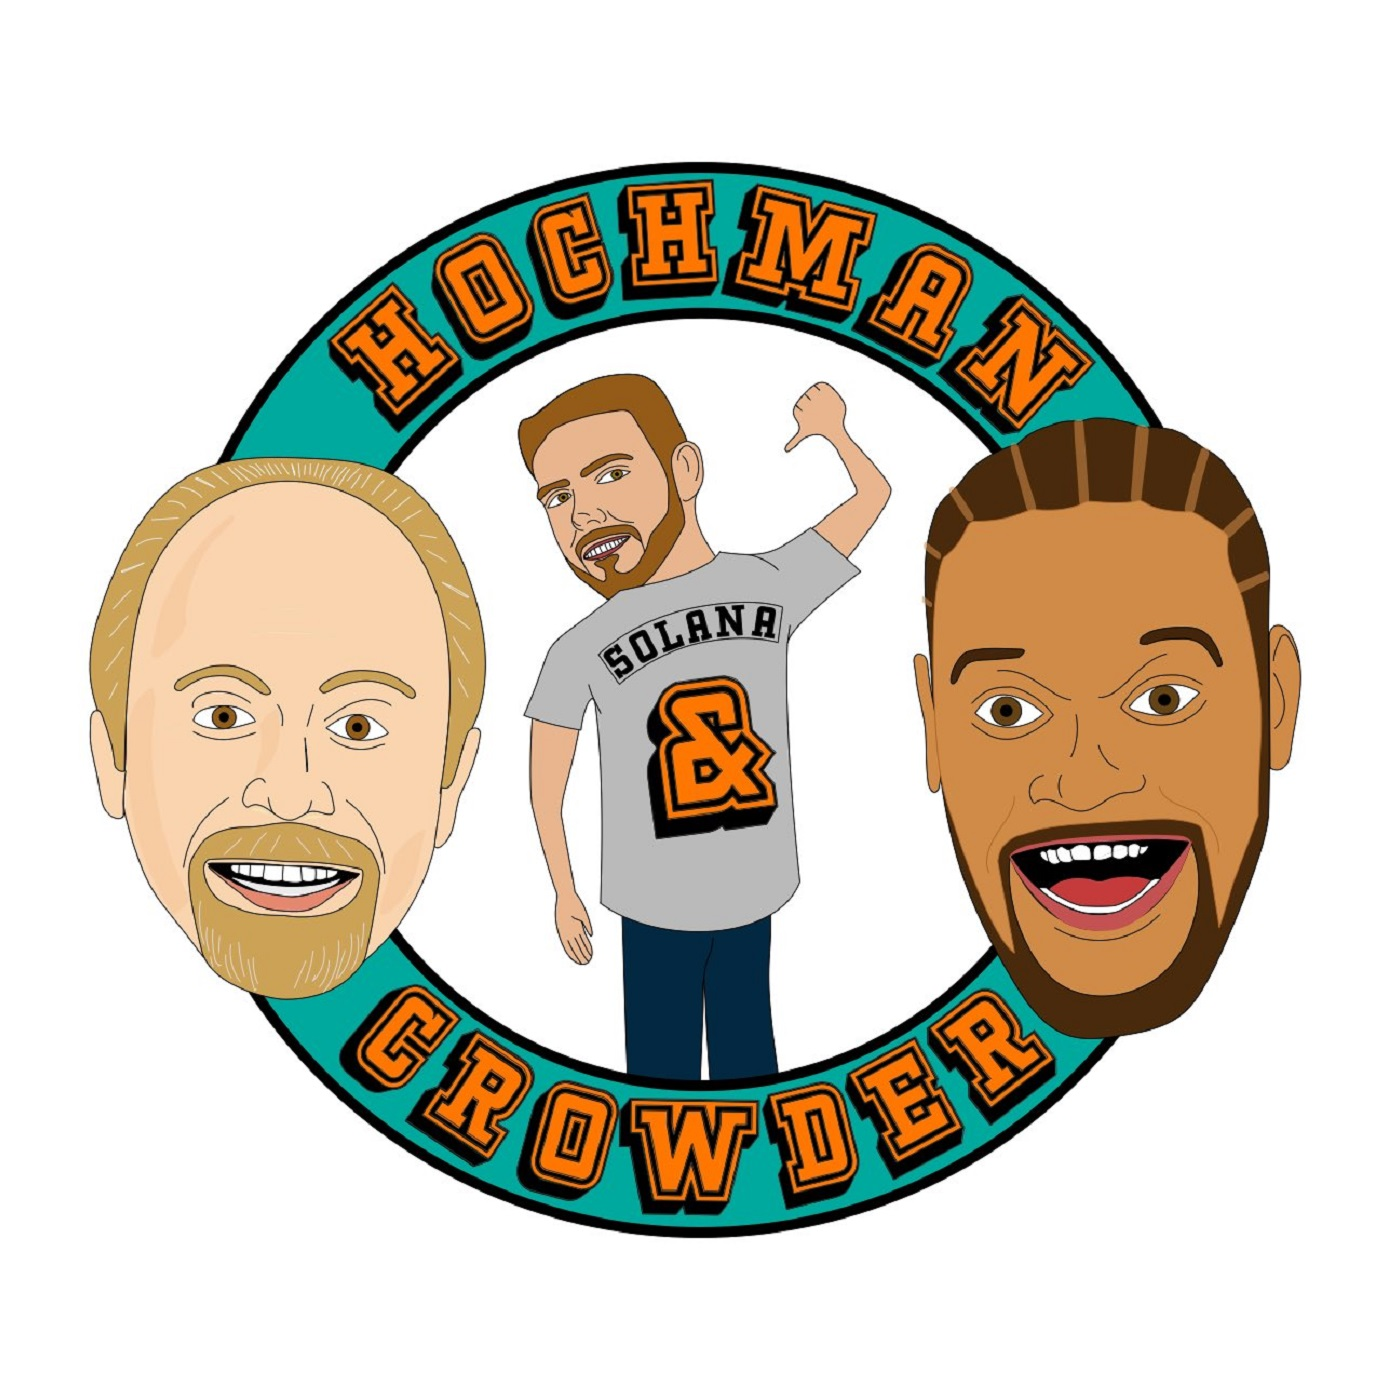 11-04-2019 - Hoch and Crowder Podcast Hour 4